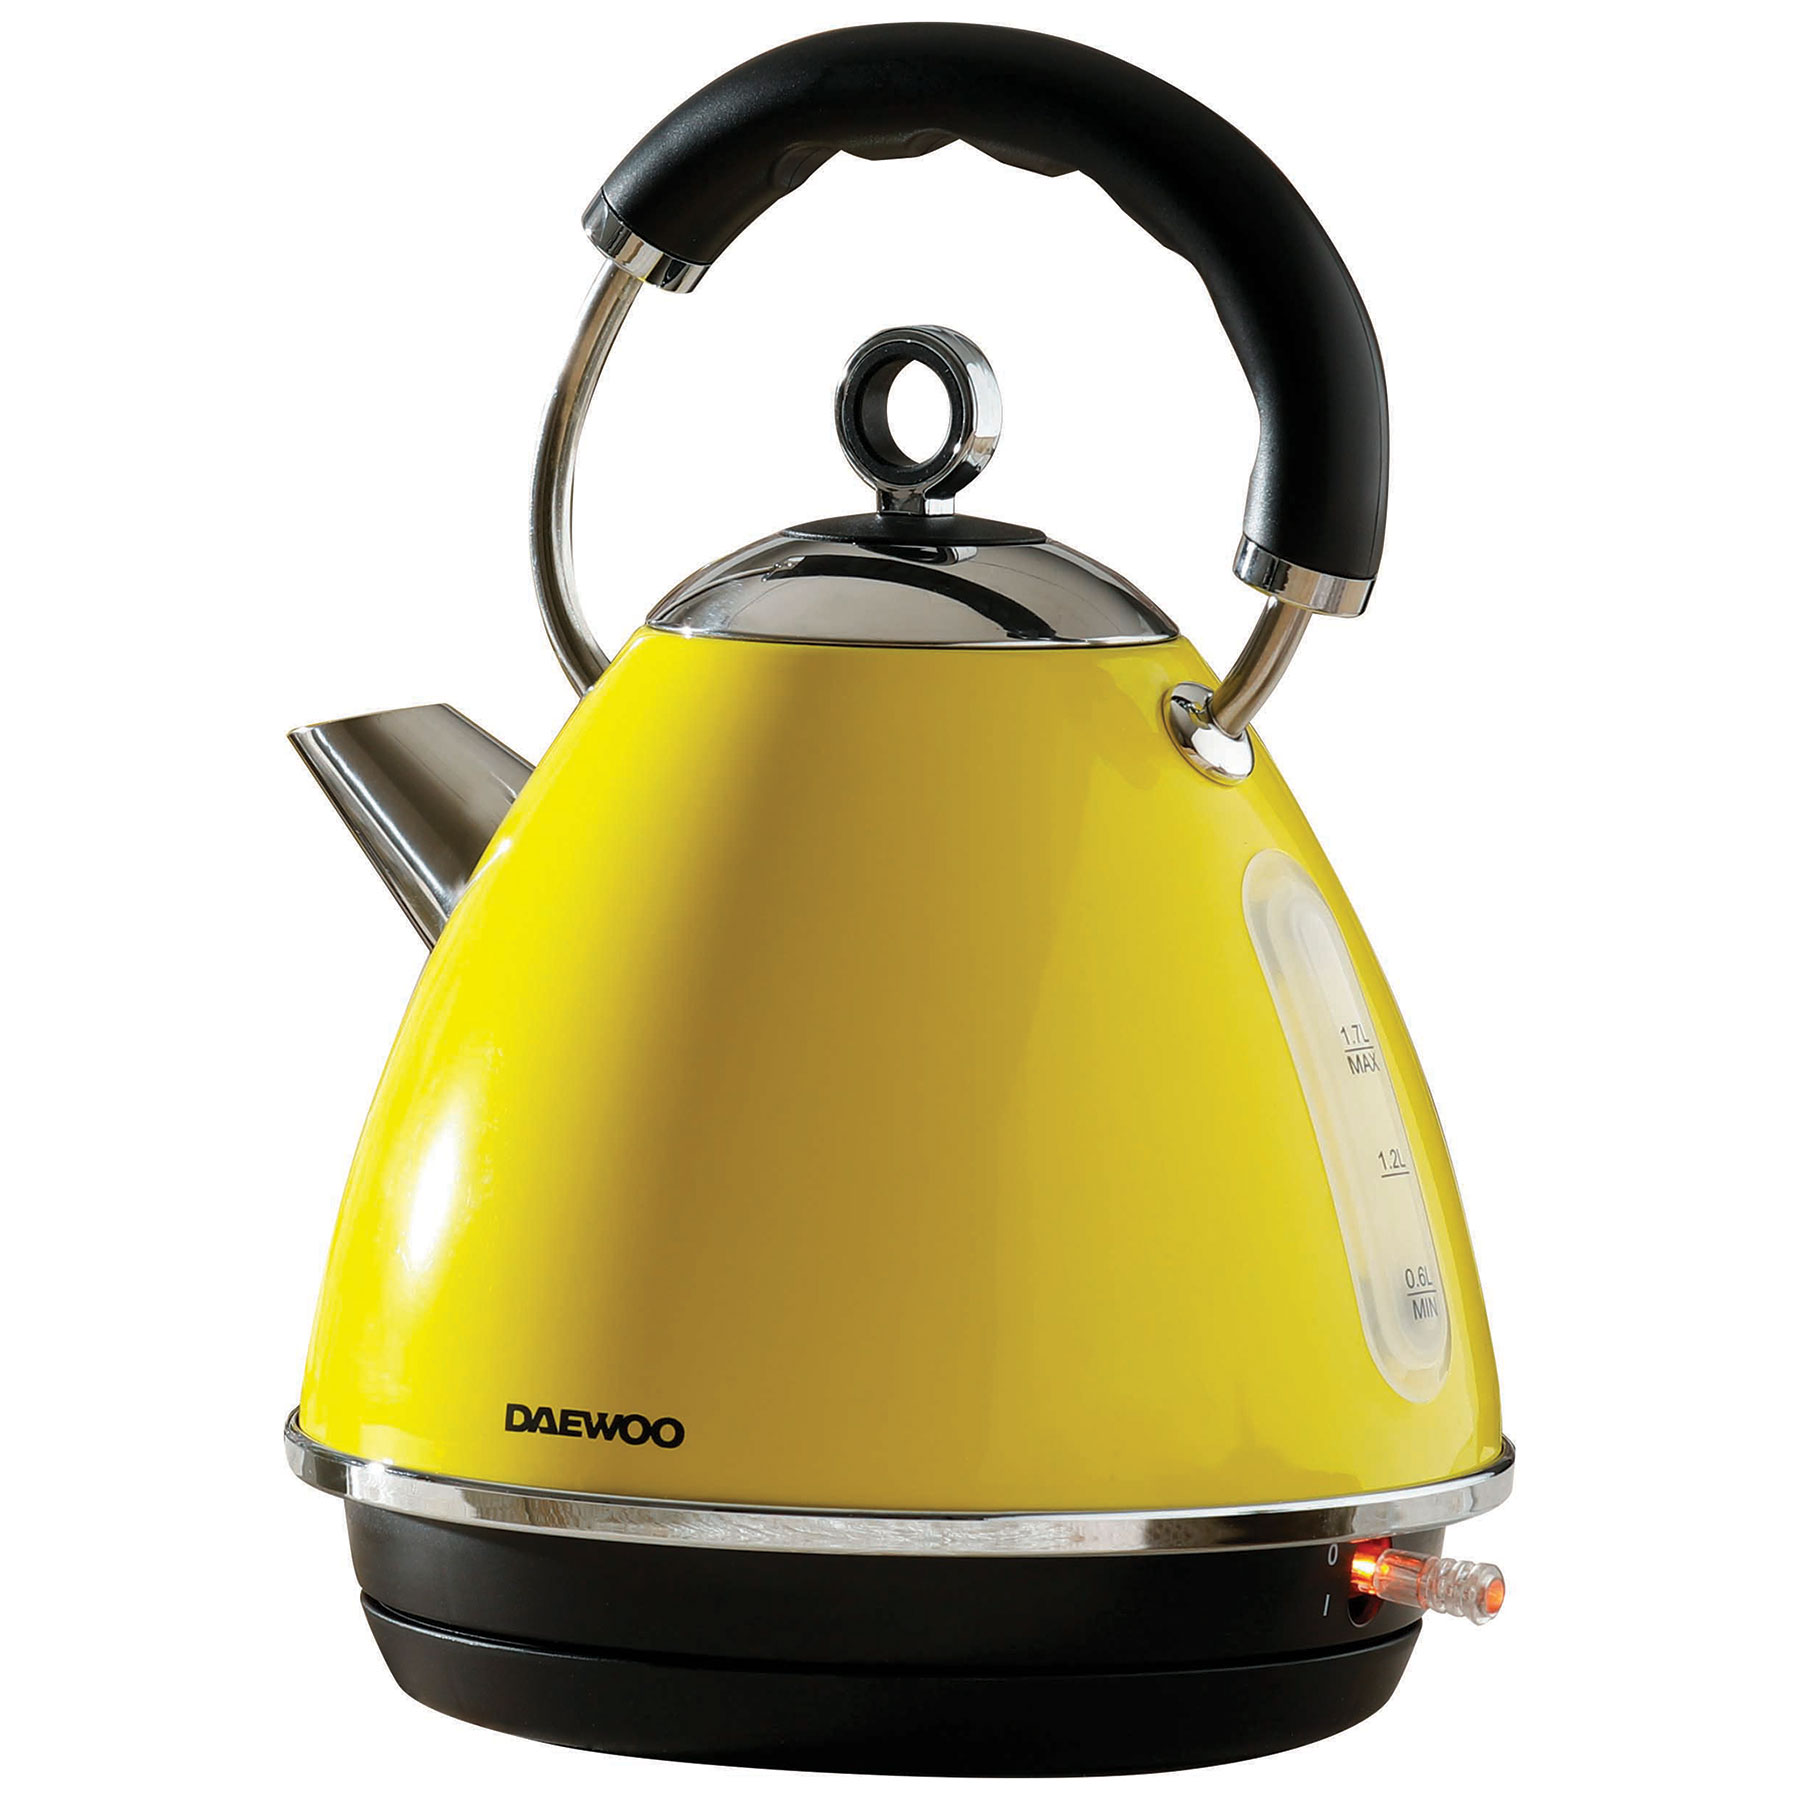 Image of Daewoo SDA1995GE Soho Pyramid Kettle in Yellow 1 7L 3kW Fast Boil